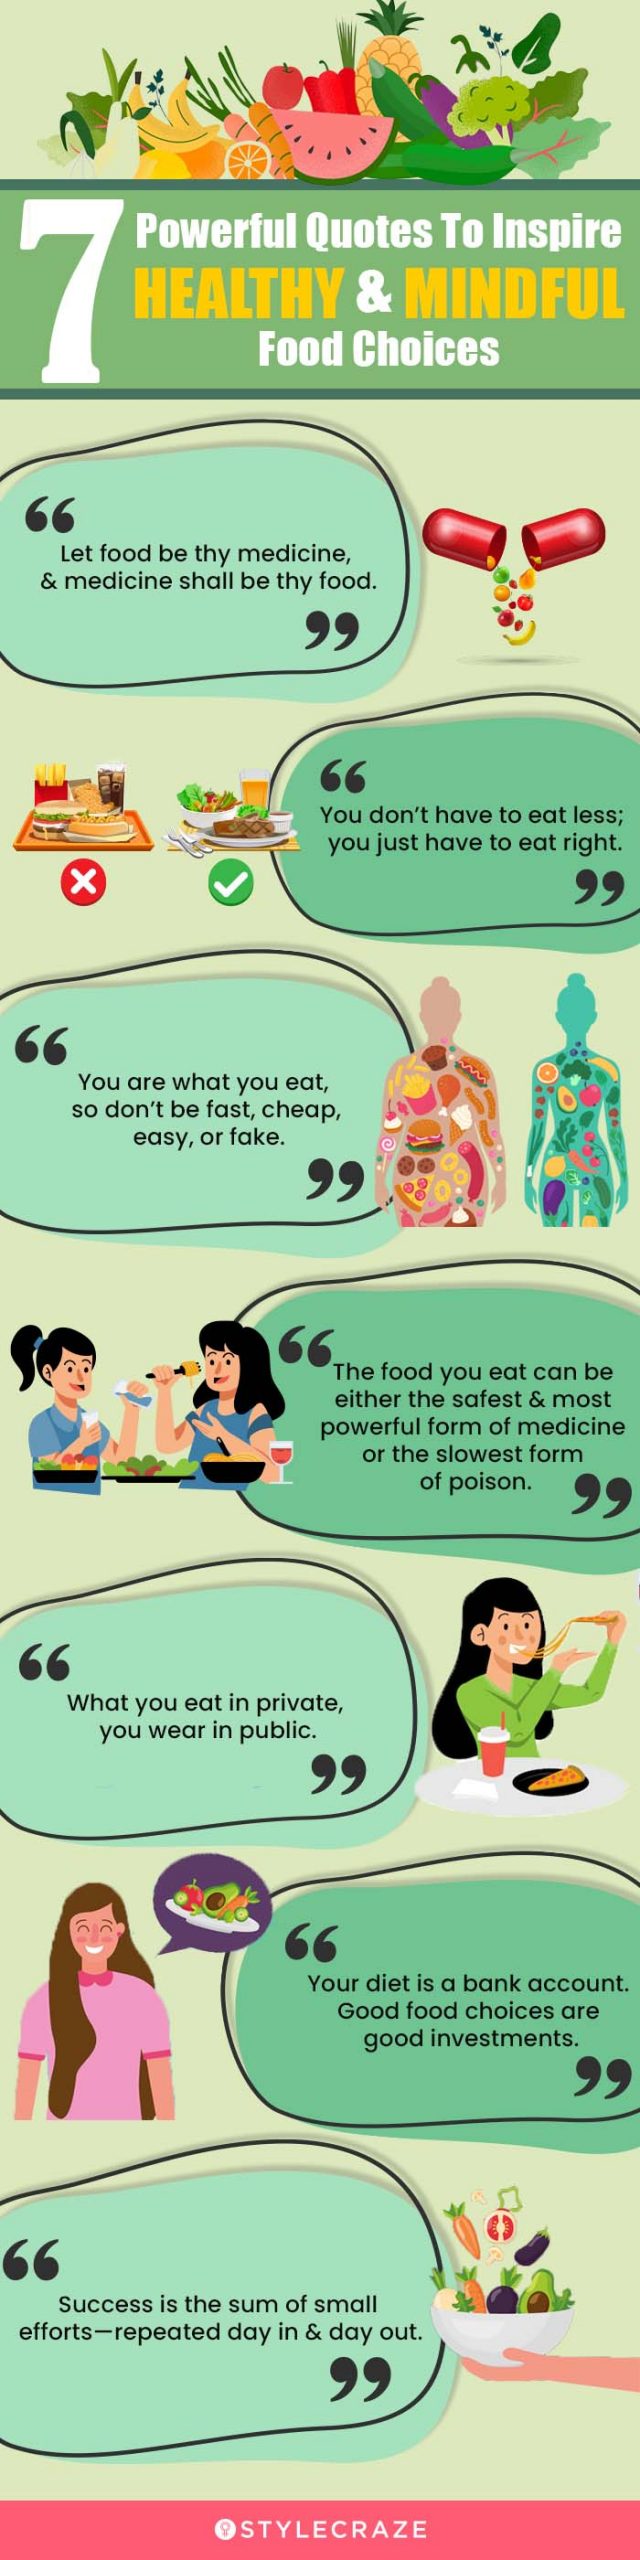 powerful quotes to inspire healthy and mindful food choices [infographic]